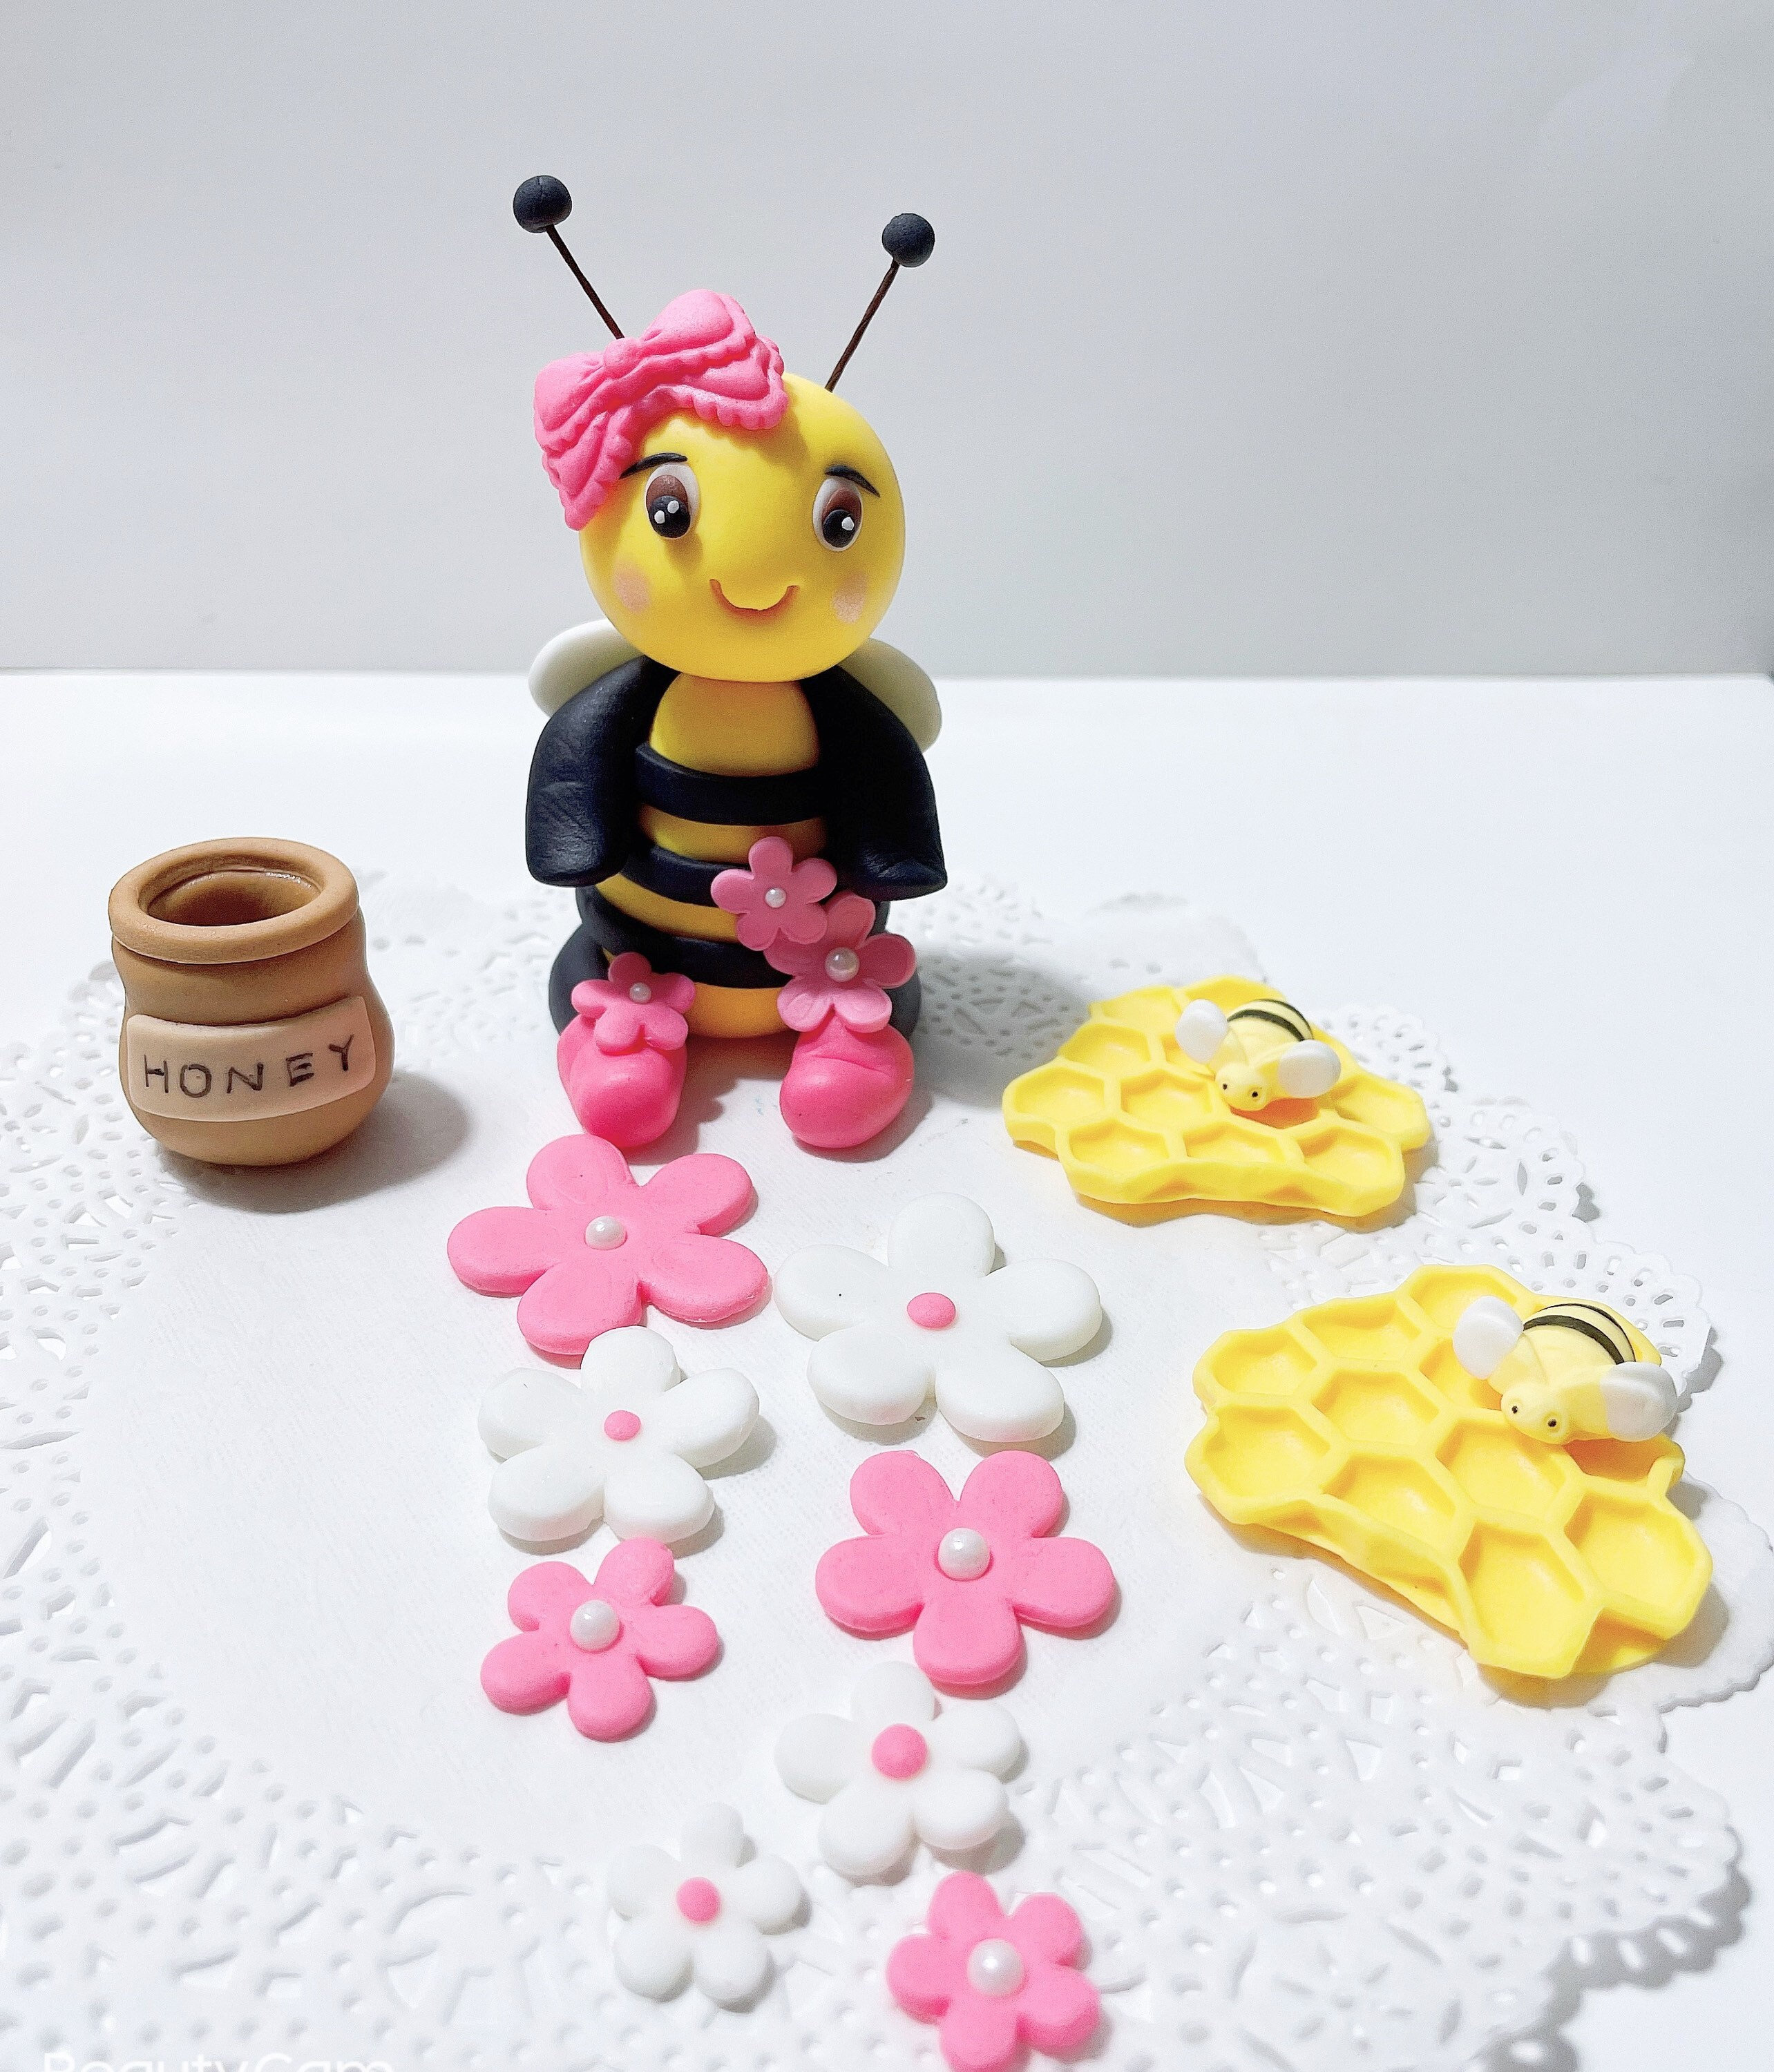 4 Pcs Bumble Bee Silicone Mold Honeycomb Sunflower and Bee Fondant Molds  Kit Cupcake Hive DIY Chocolate Fondant Candy Cookies Crafting Party Wedding